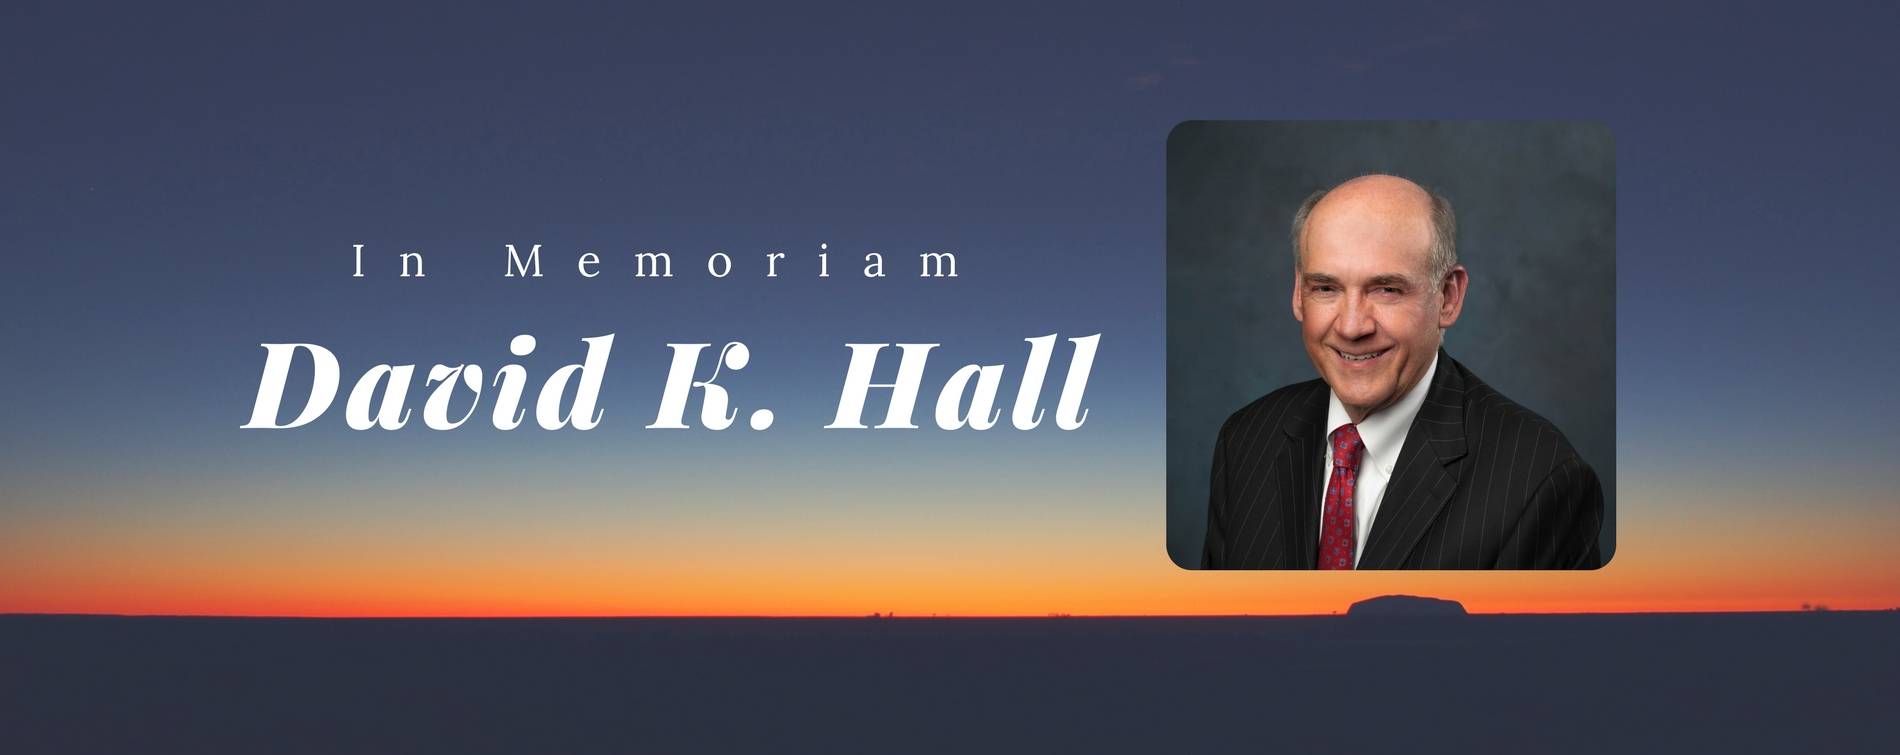 A sunset with an image of Trustee David Hall